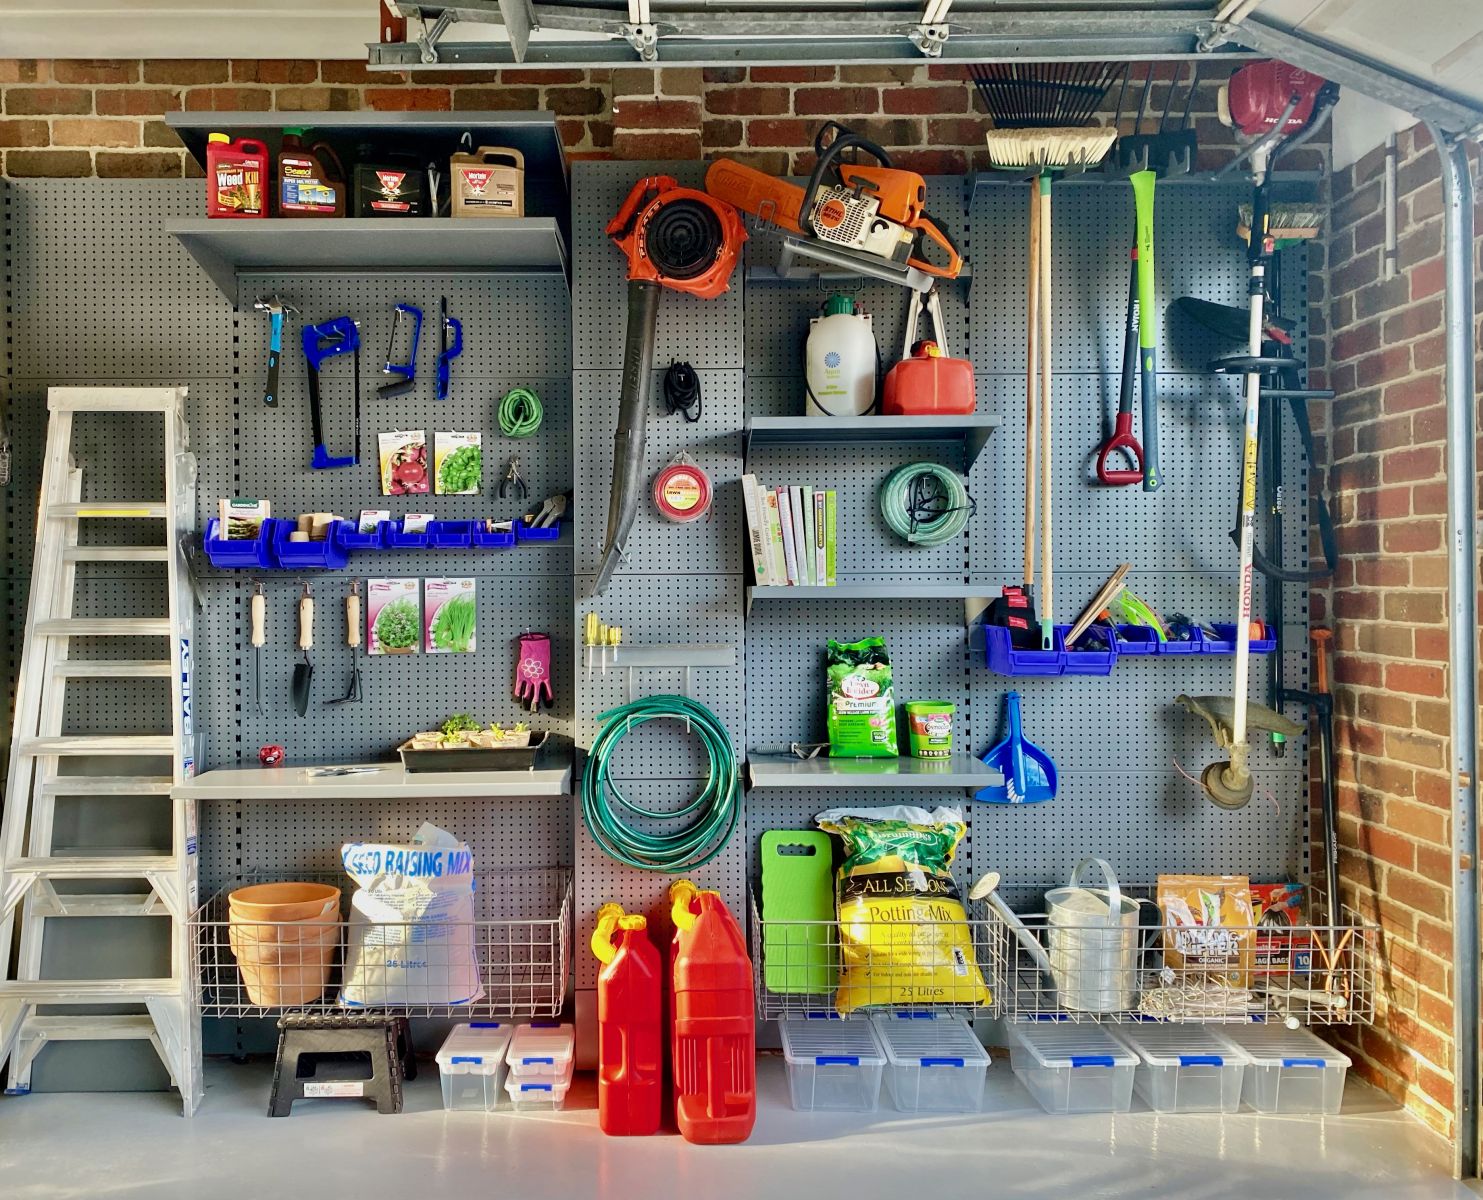 A garage storage system for gardening products with garden accessories and tools, soil enhancers and watering can.